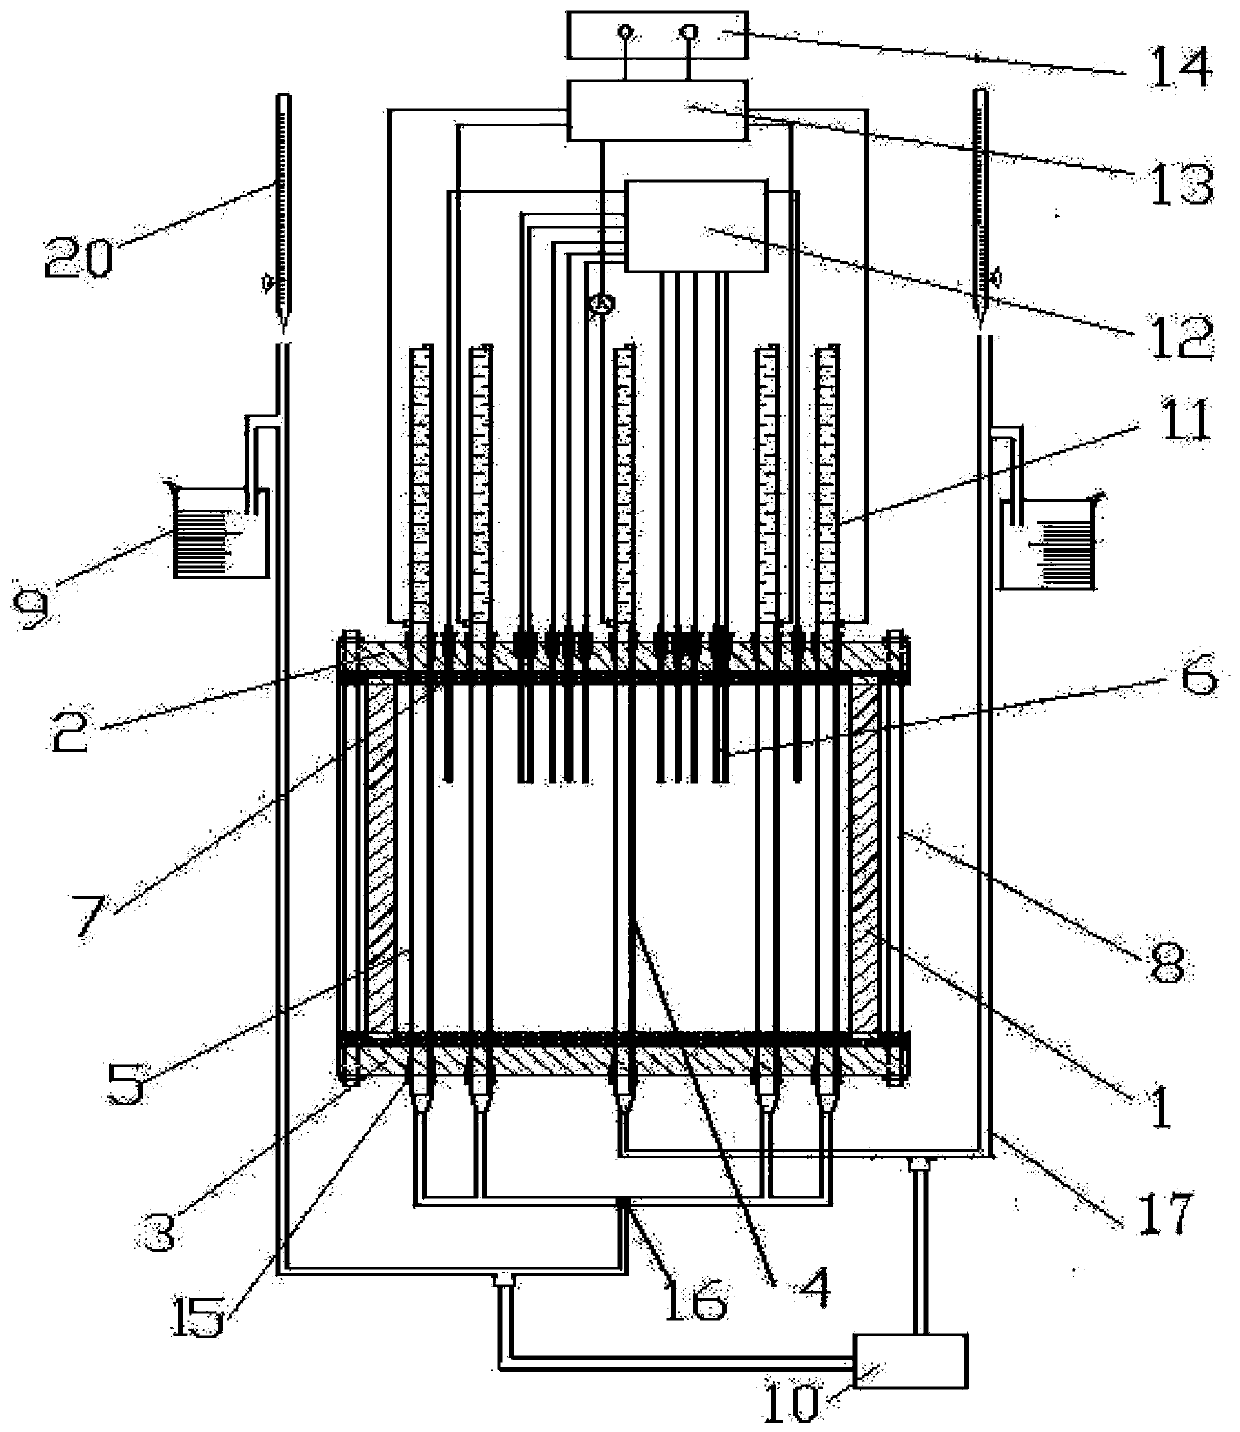 Two-dimensional inhomogeneous field experiment device for electrically repairing polluted soil